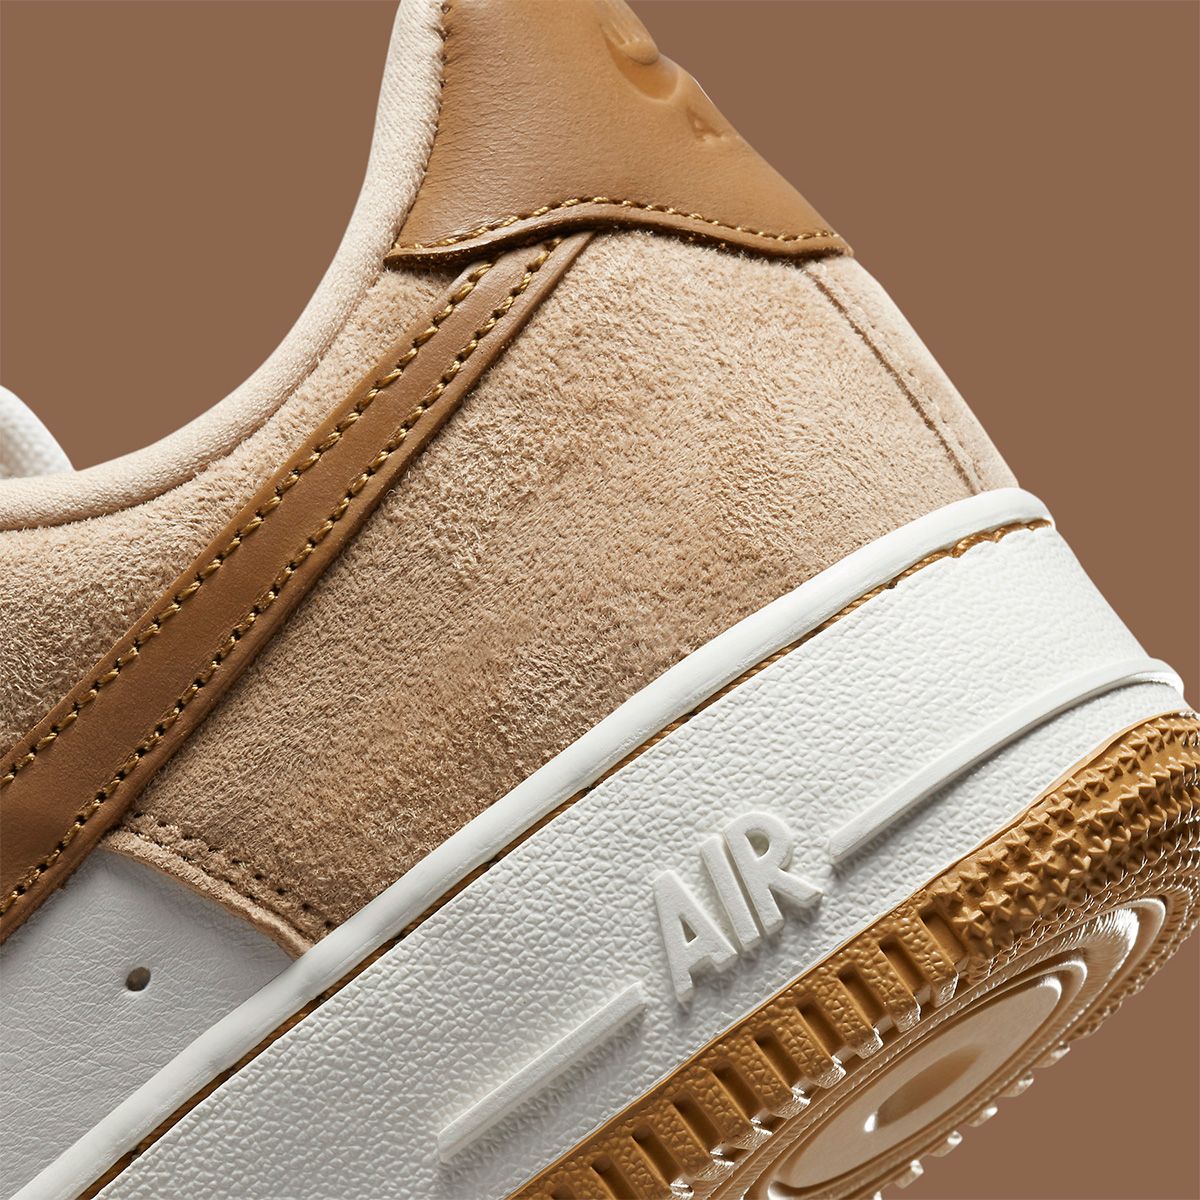 Where to Buy the Nike Air Force 1 Low LXX “Vachetta Tan” | House